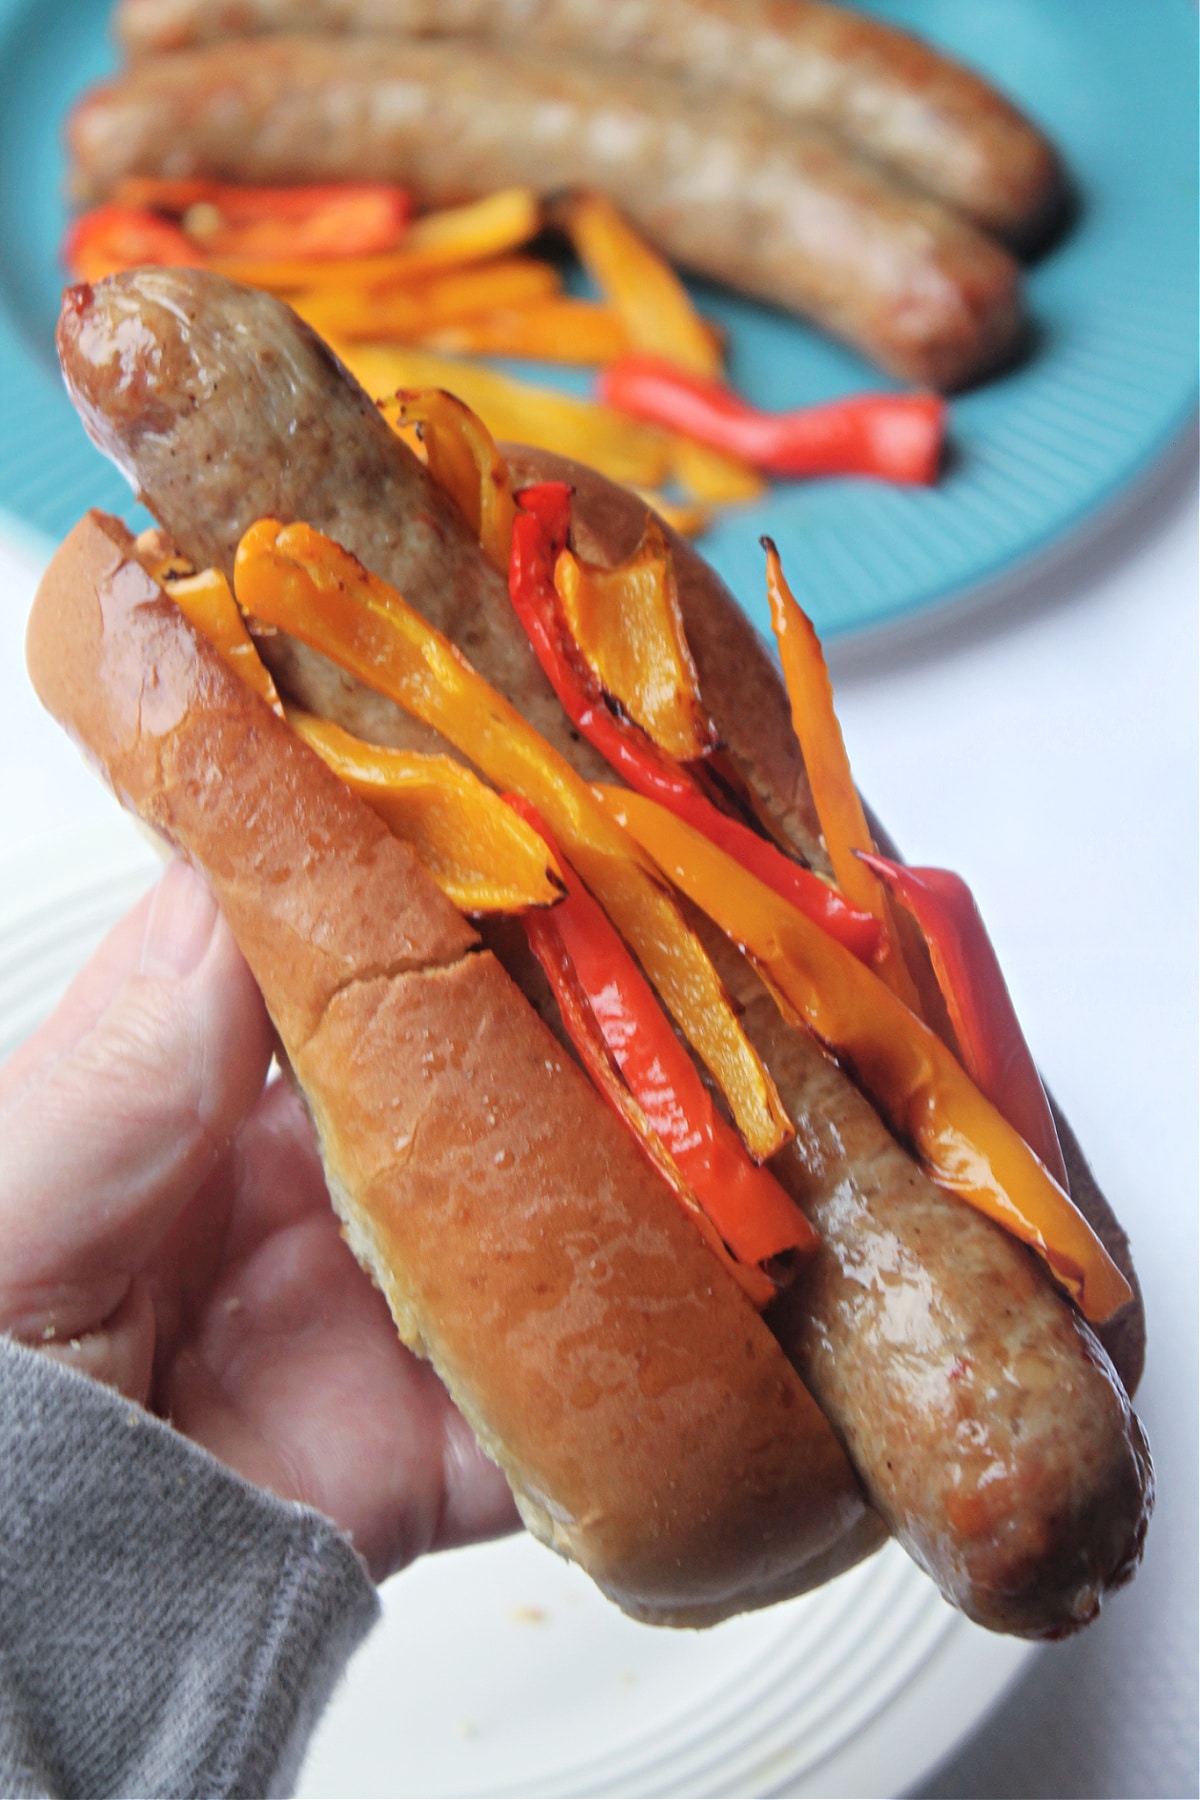 sausage in roll with peppers being held in hand